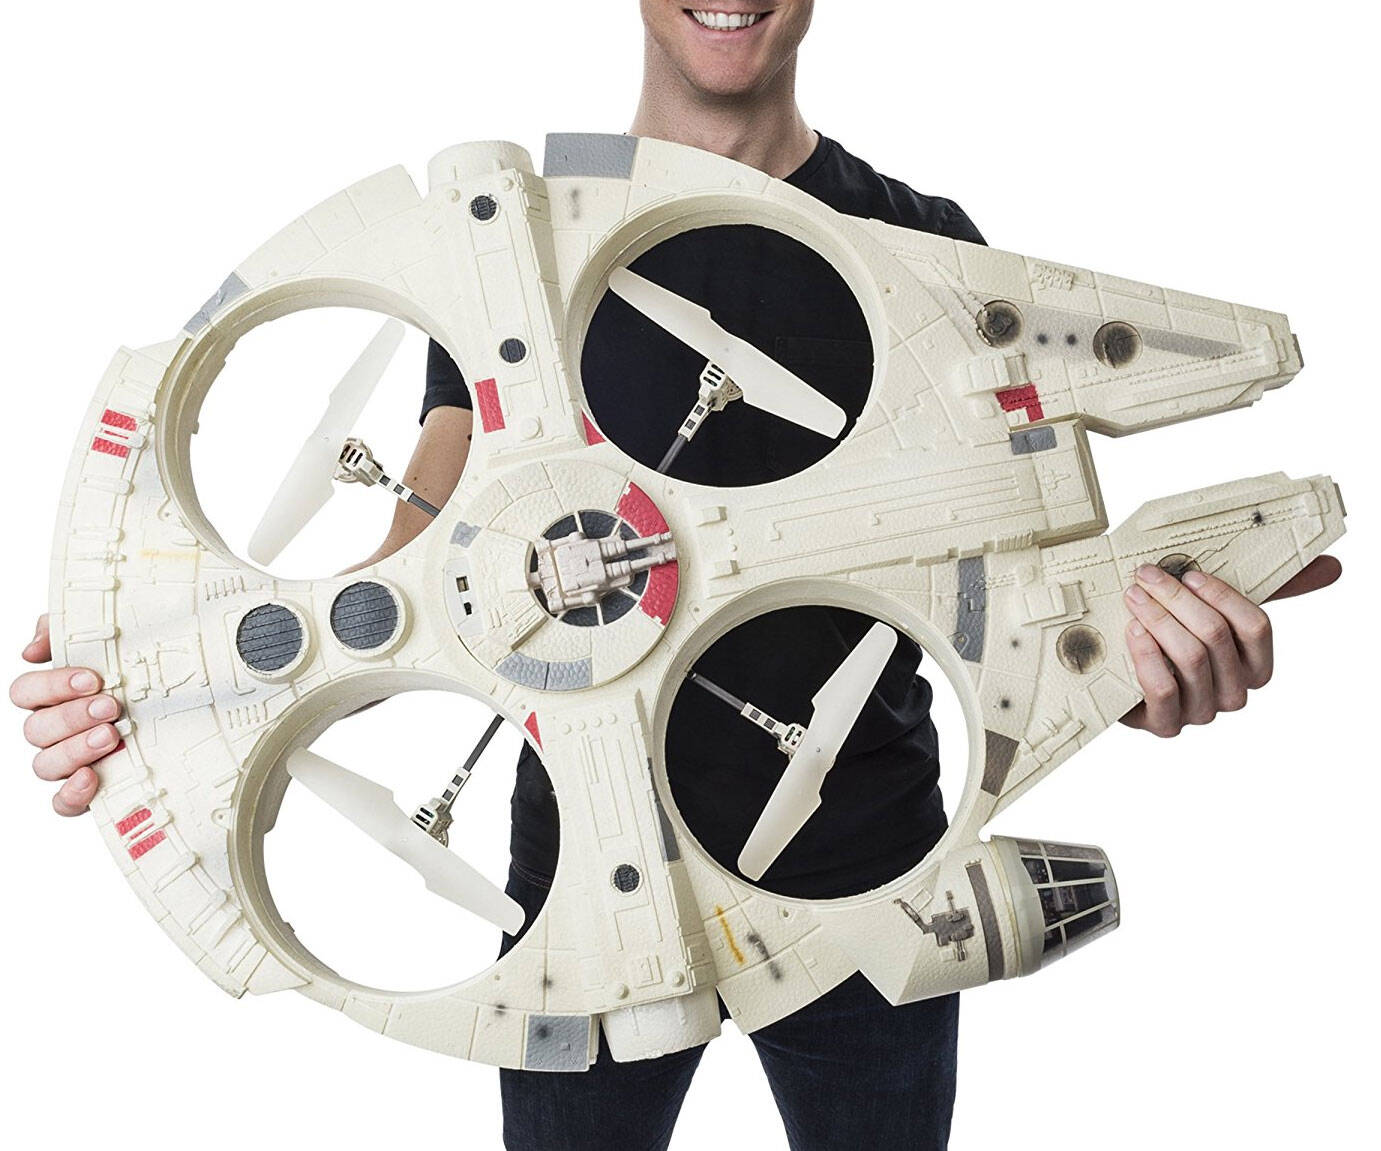 Giant Flying Millennium Falcon Drone - coolthings.us